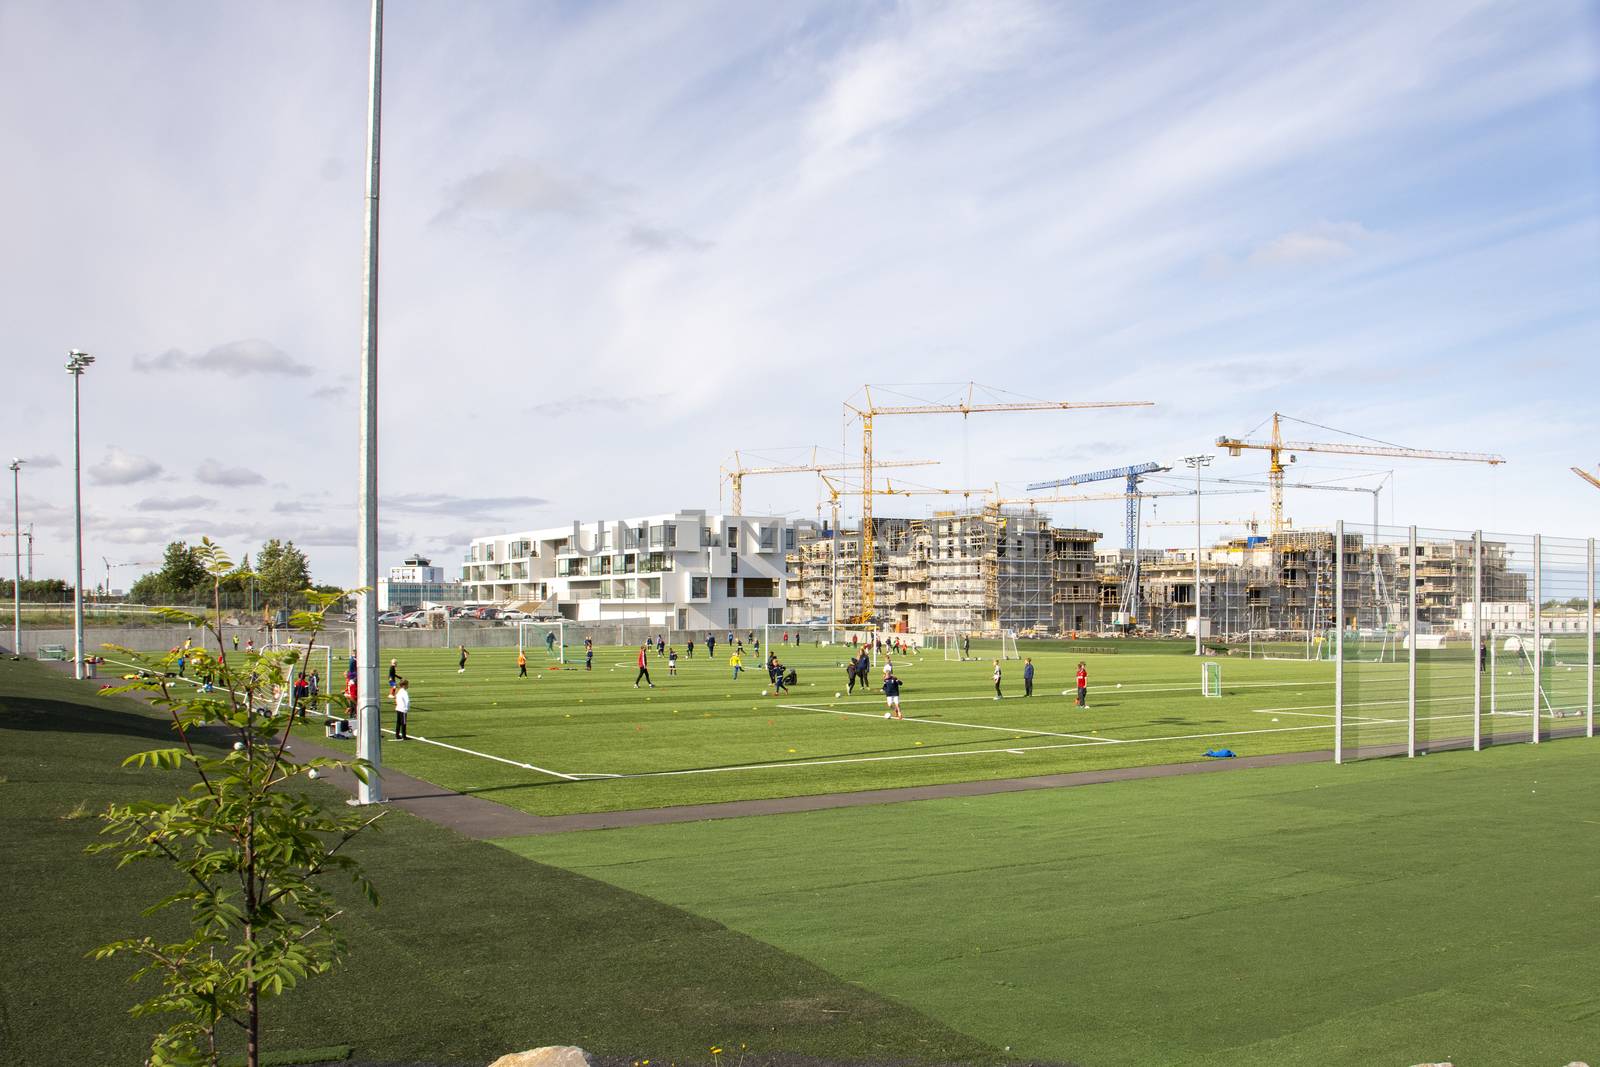 soccer sports field with kids training for football in Reykjavik, Iceland by kb79